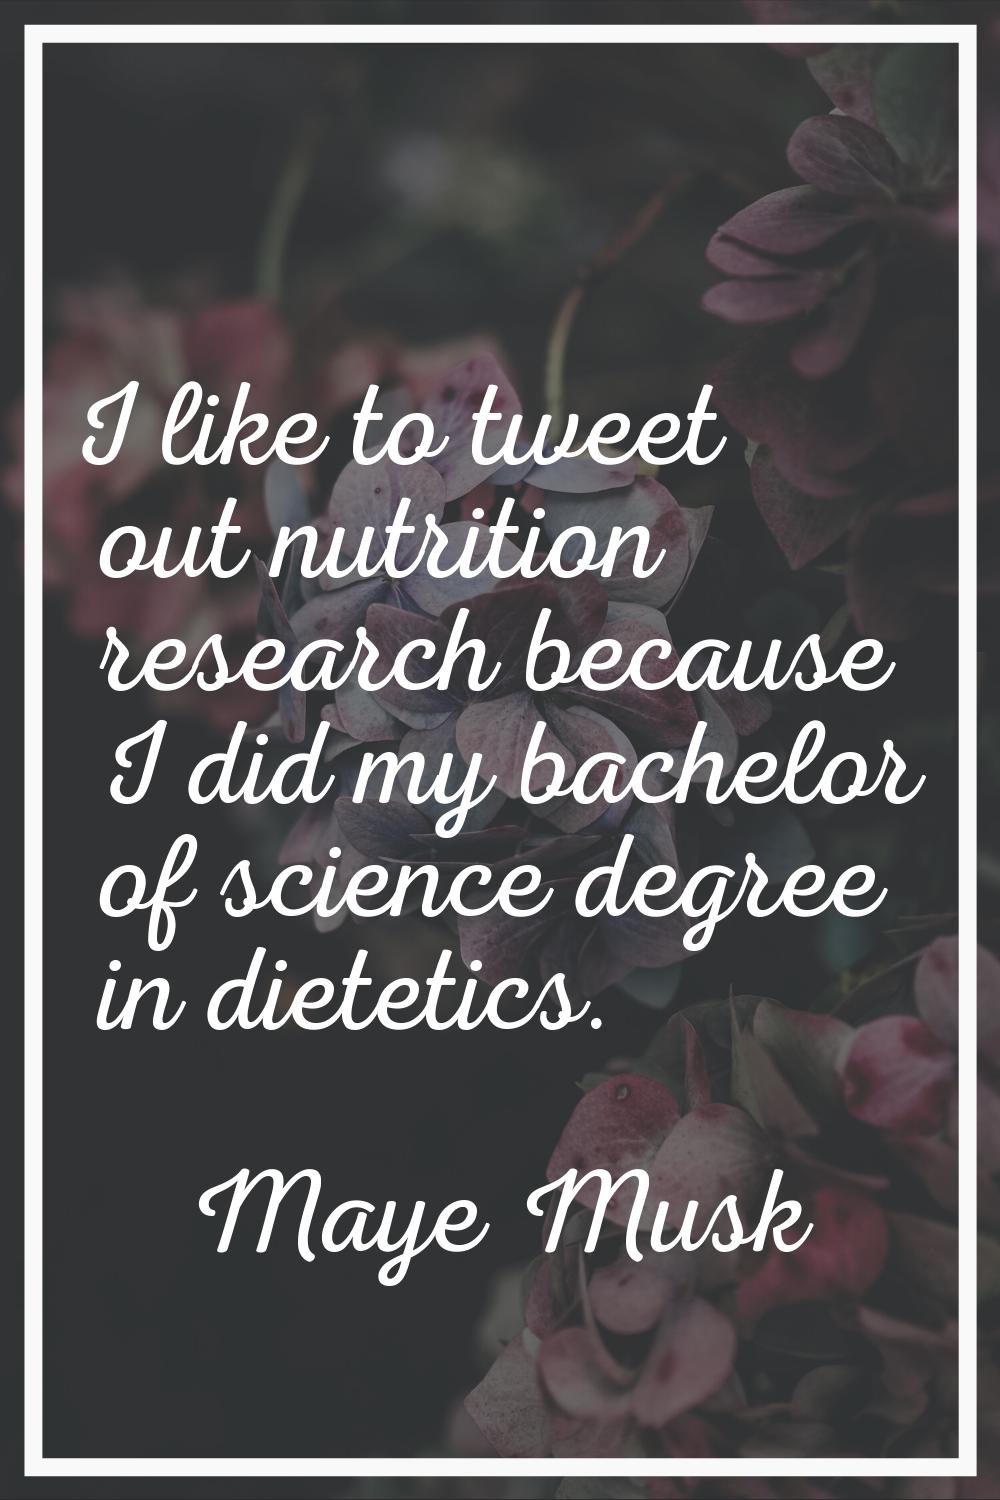 I like to tweet out nutrition research because I did my bachelor of science degree in dietetics.